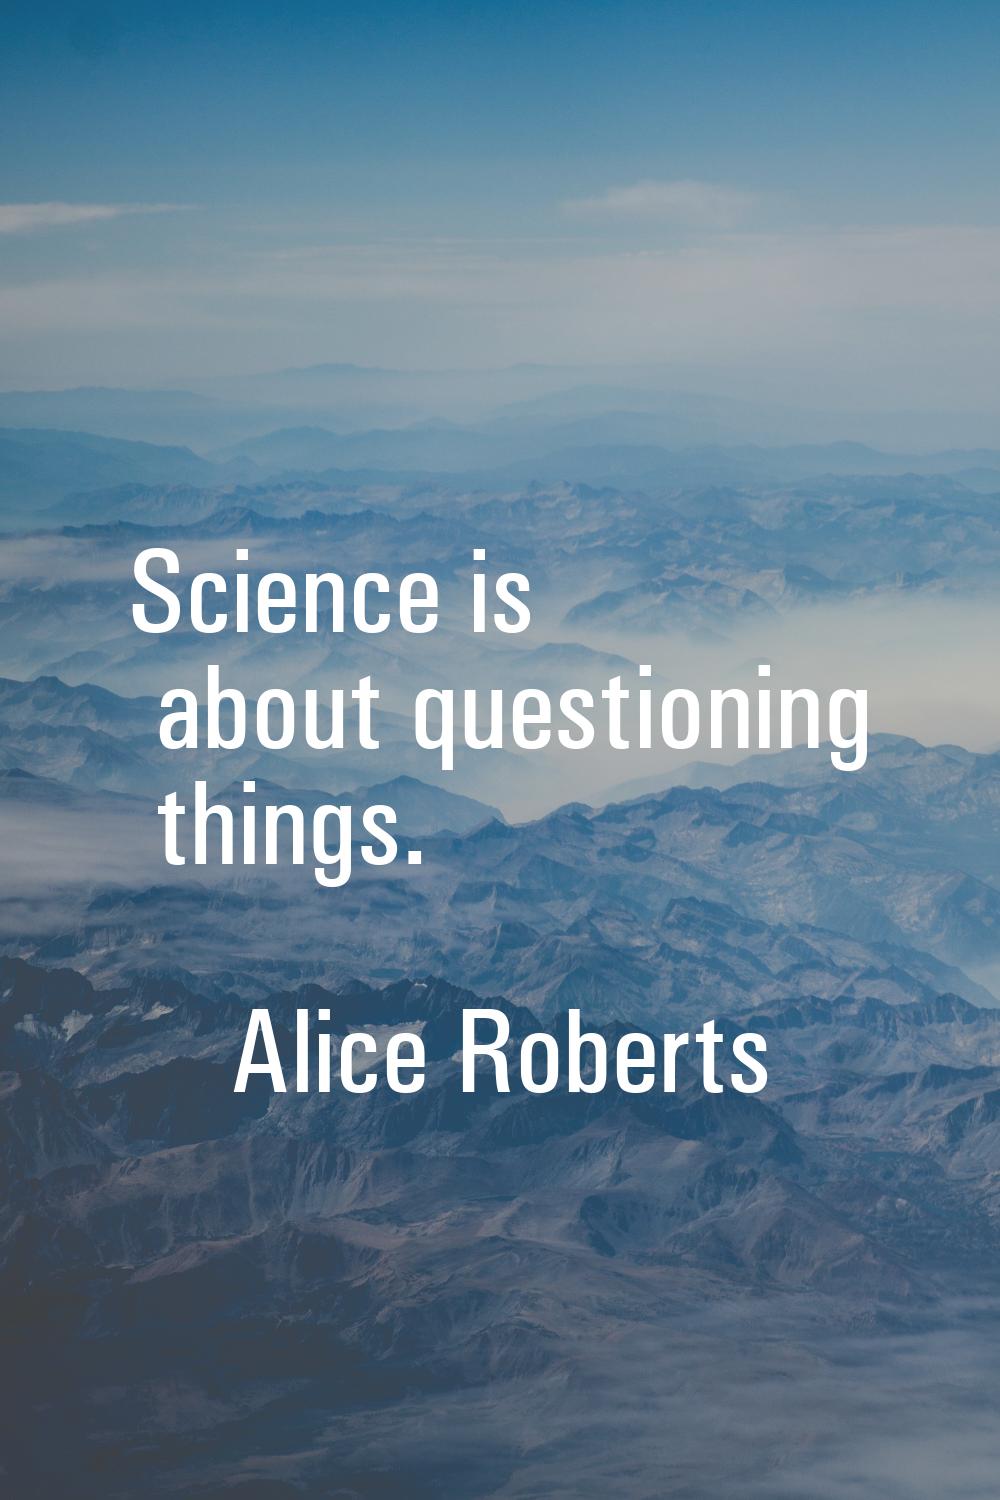 Science is about questioning things.